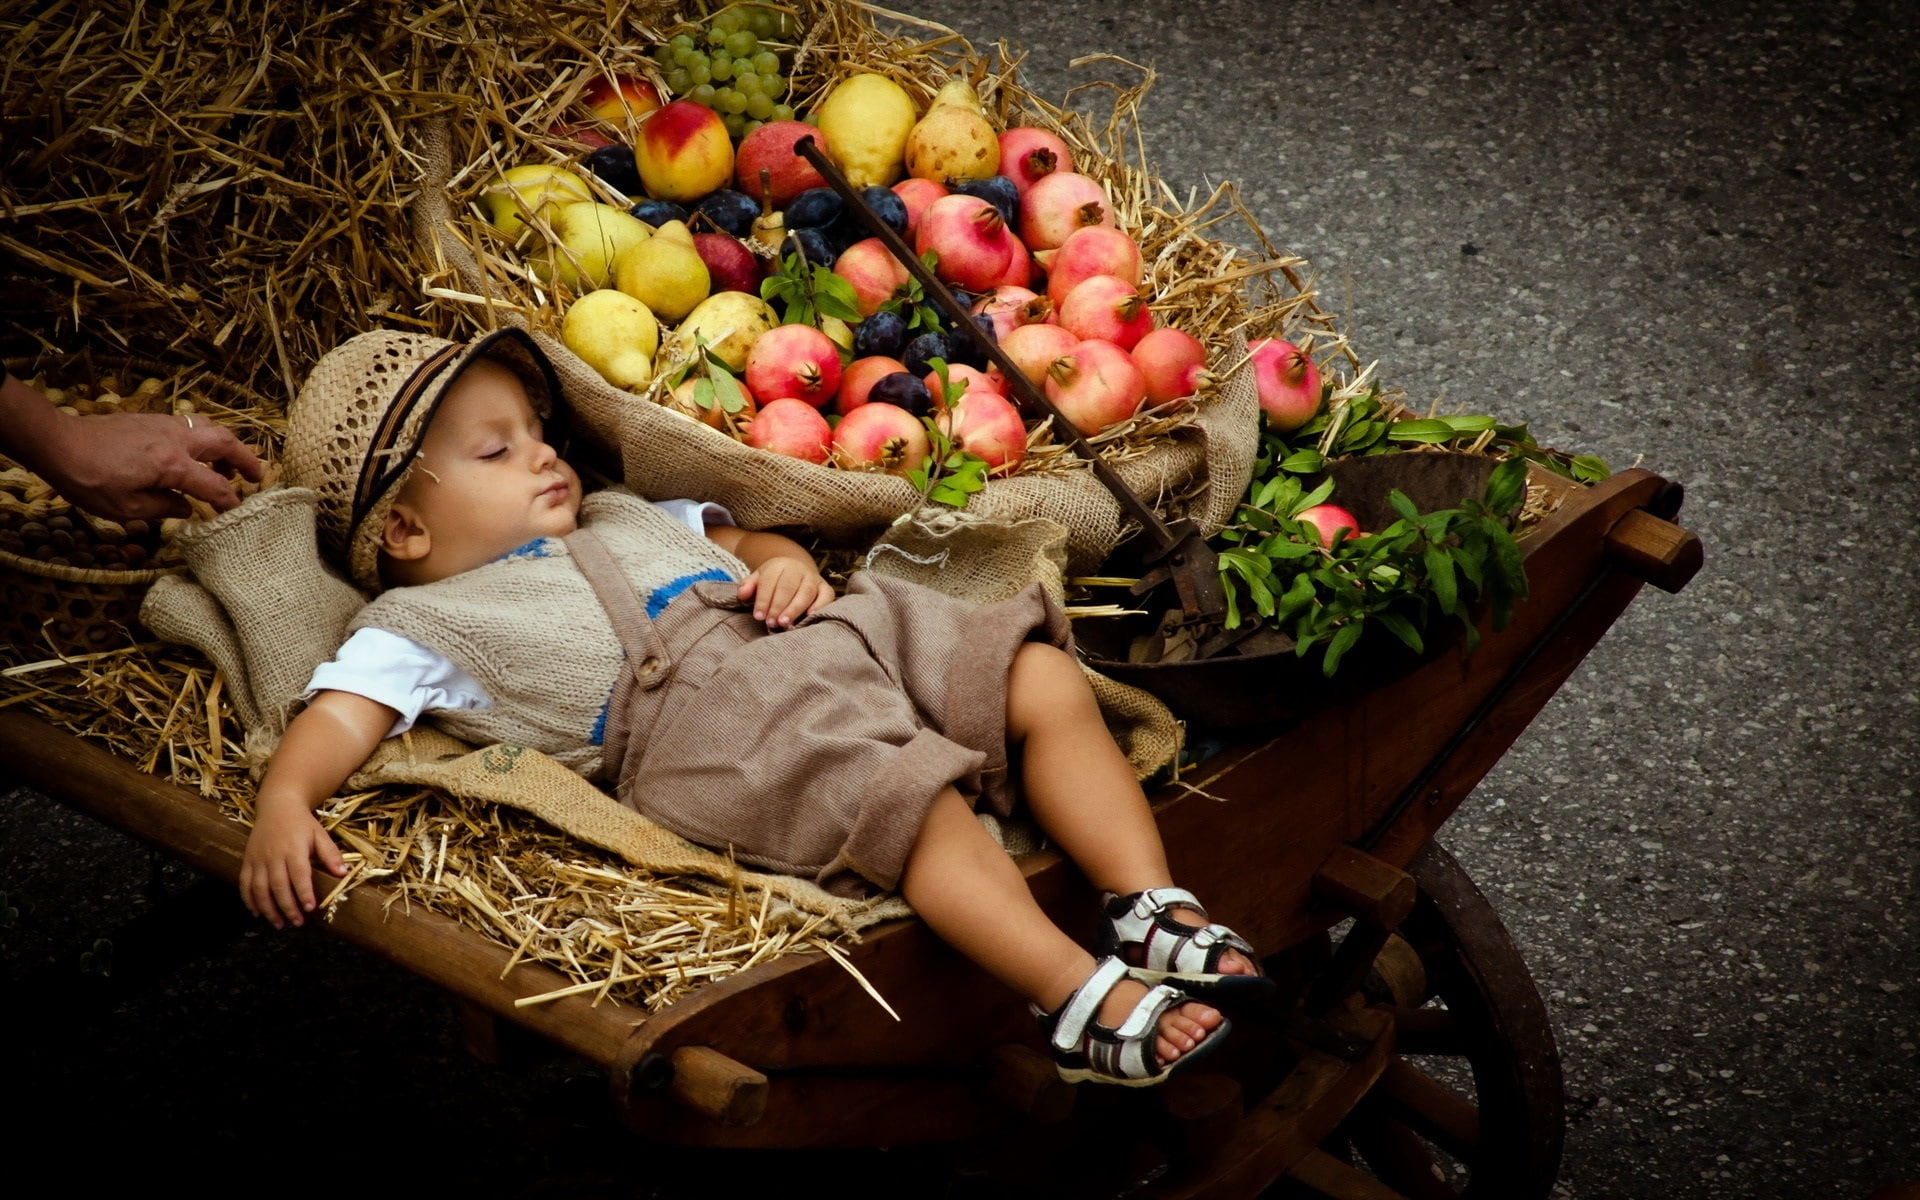 Cute boy sleeping, stroller, fruits, baby's white top, brown wicker hat; brown pants and white sandals]